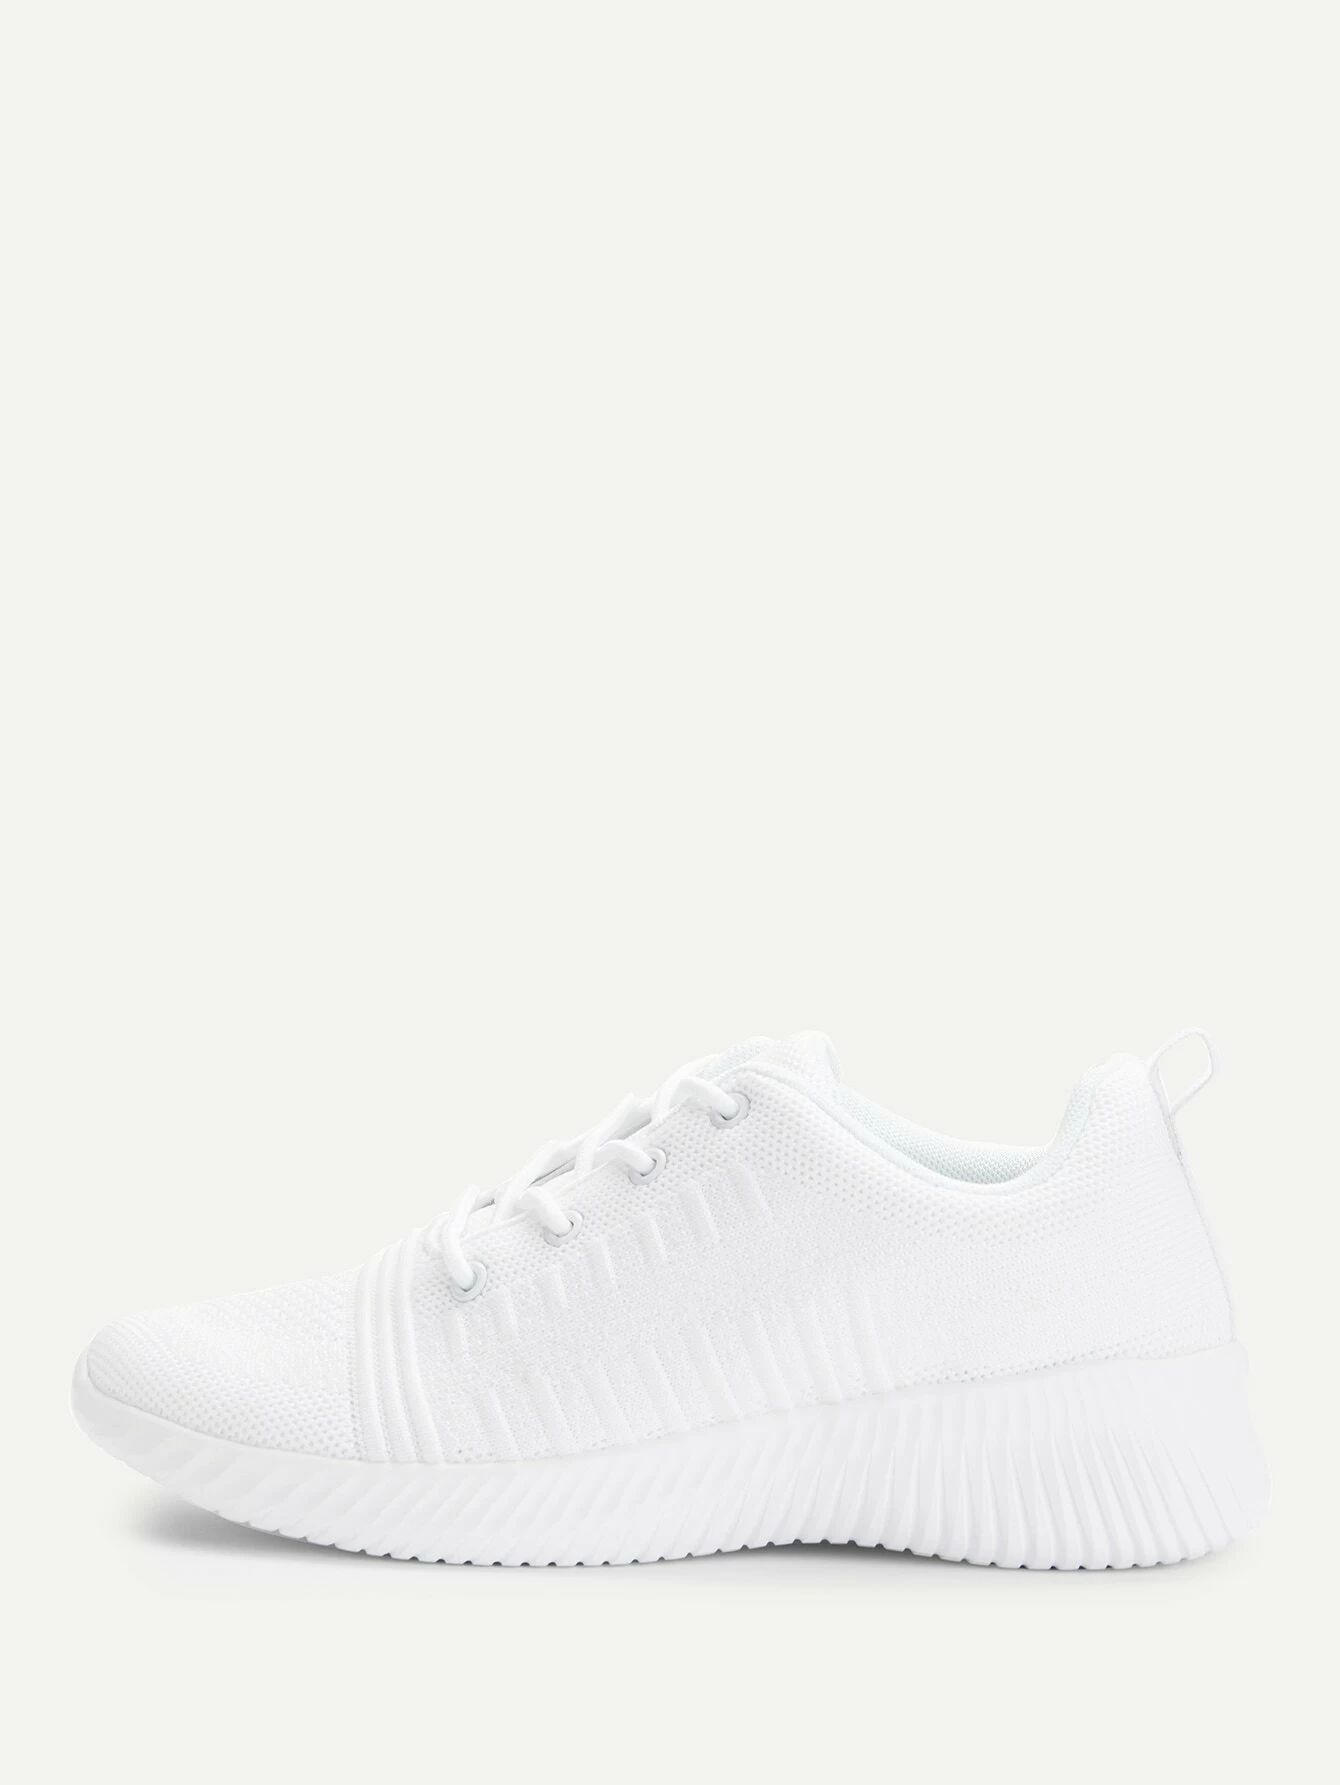 Knitted Lace Up Low Top Sneakers | SHEIN